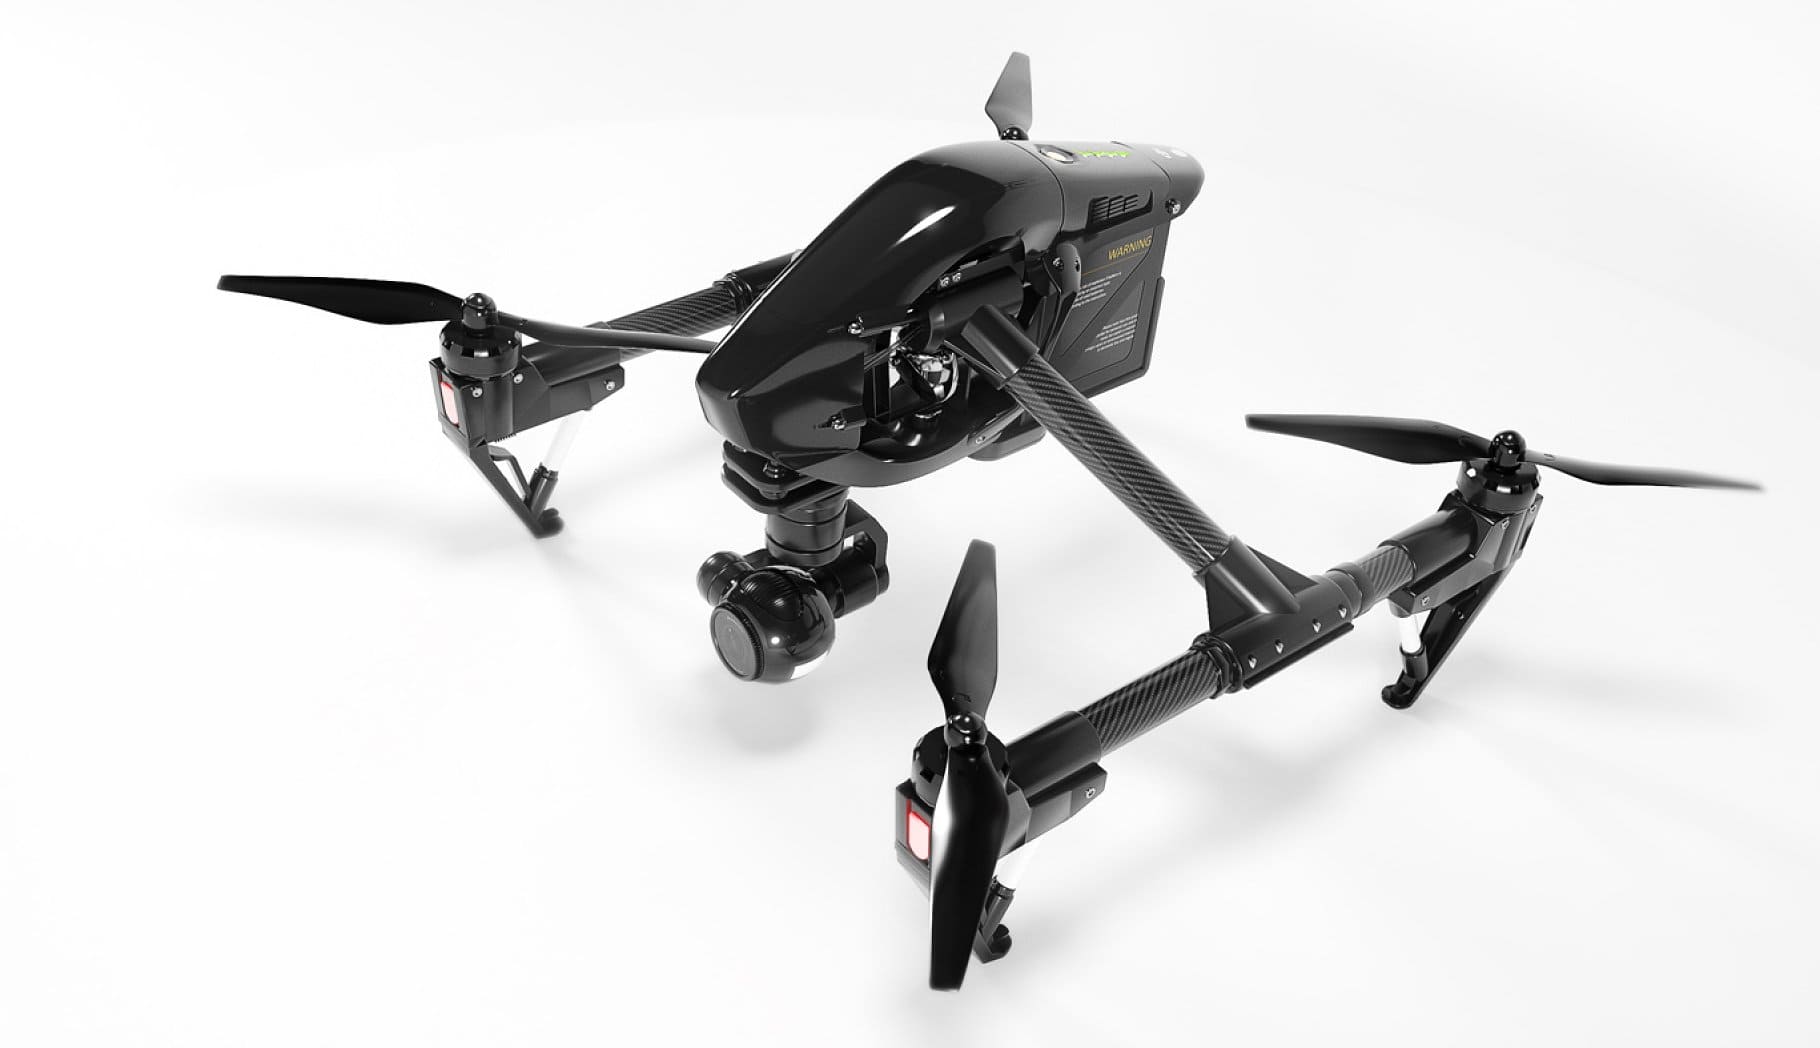 Black lacquered quadcopter with small details.